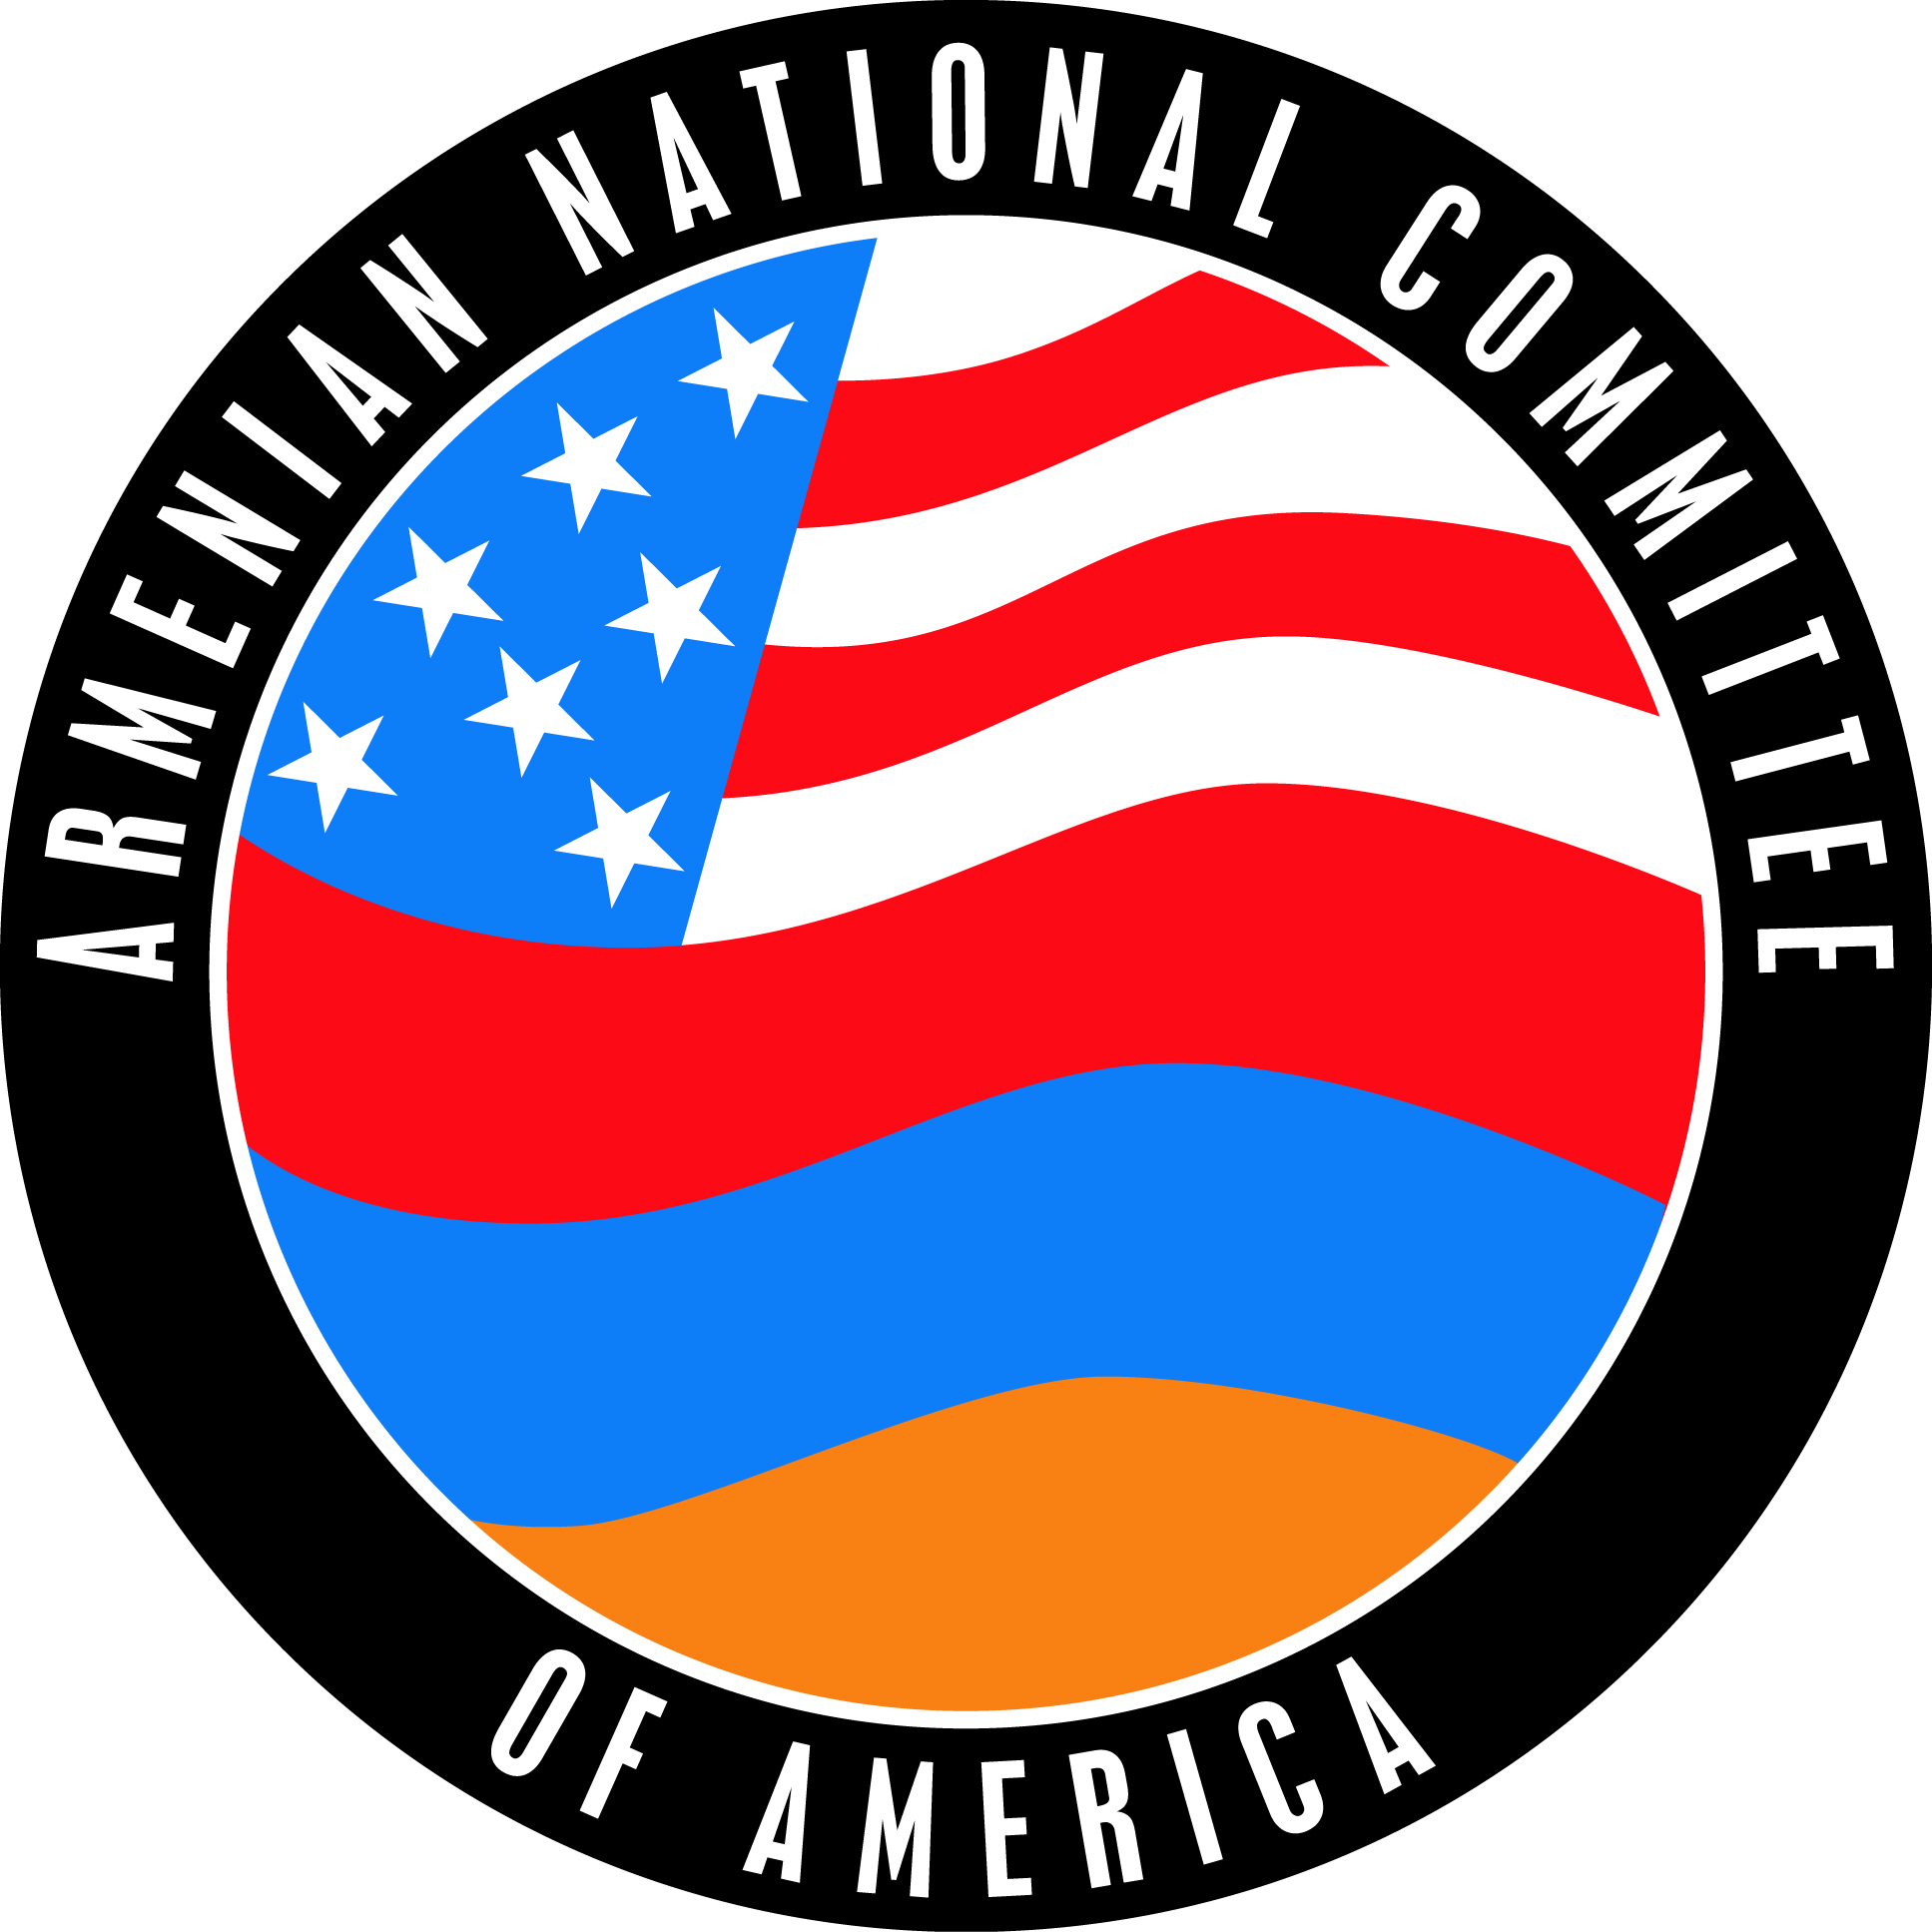 ANCA Statement on the Parliamentary Elections in Armenia